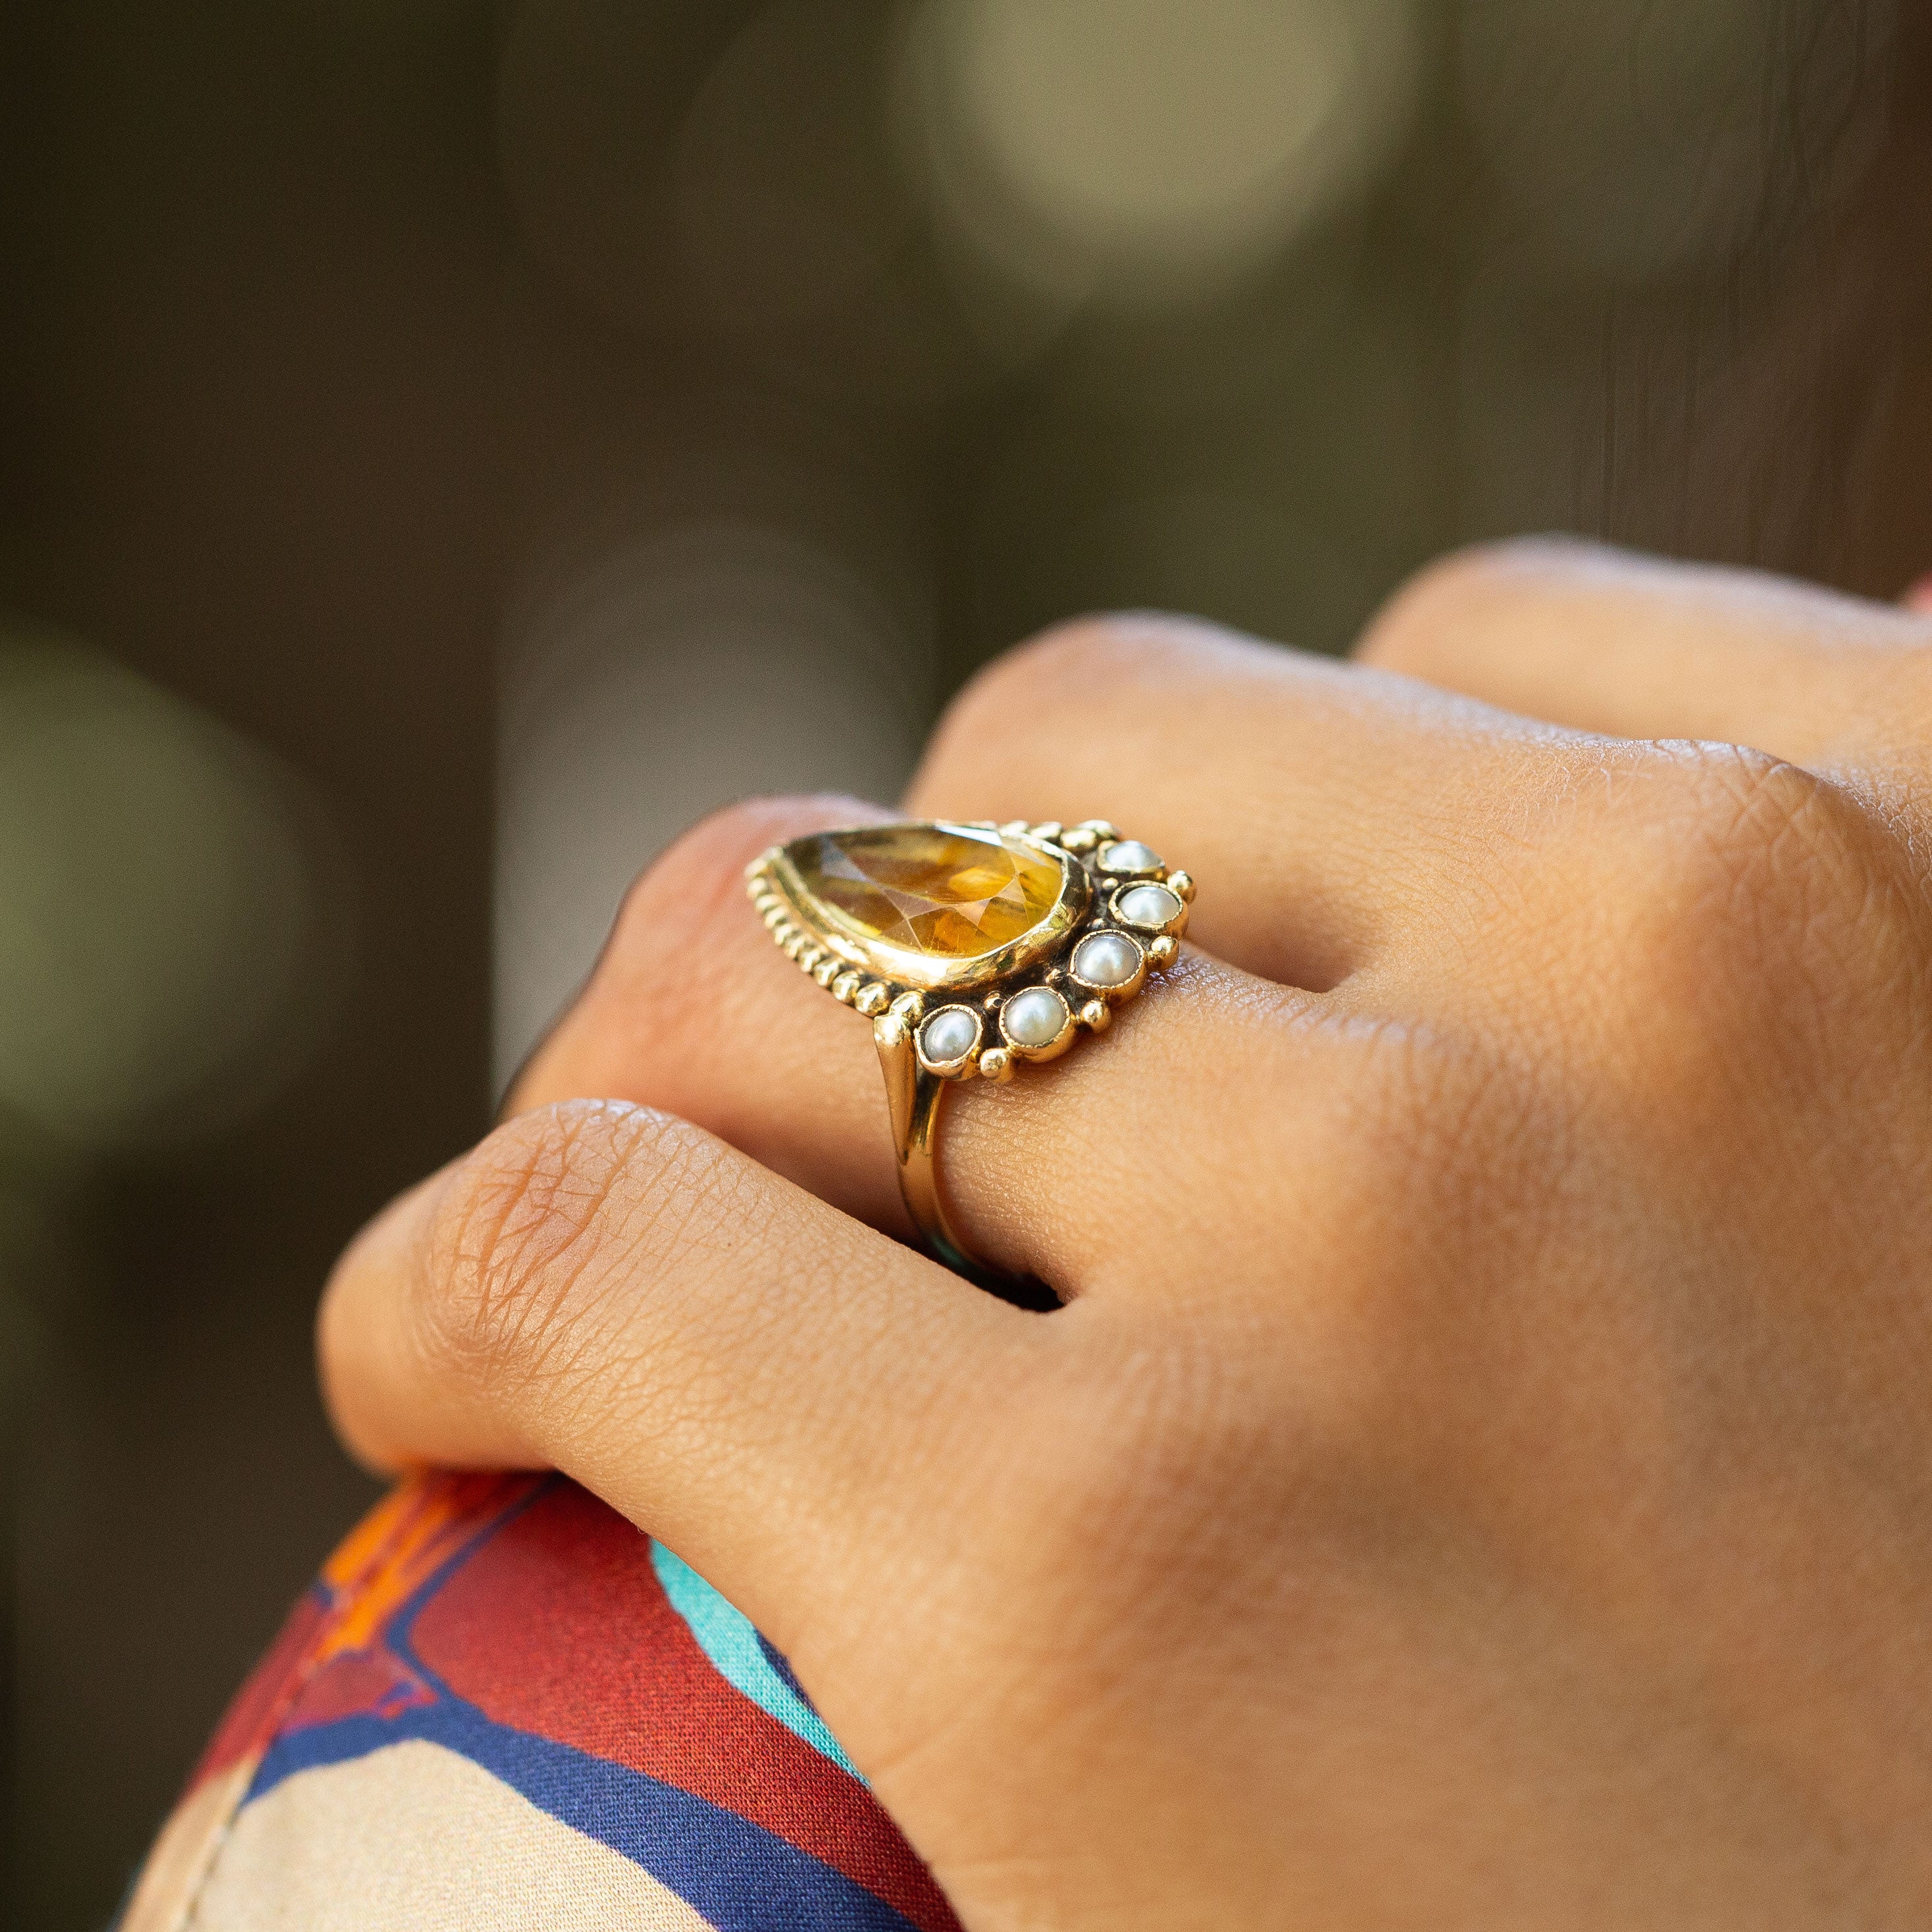 Dutch Citrine and Pearl Elongated Ring